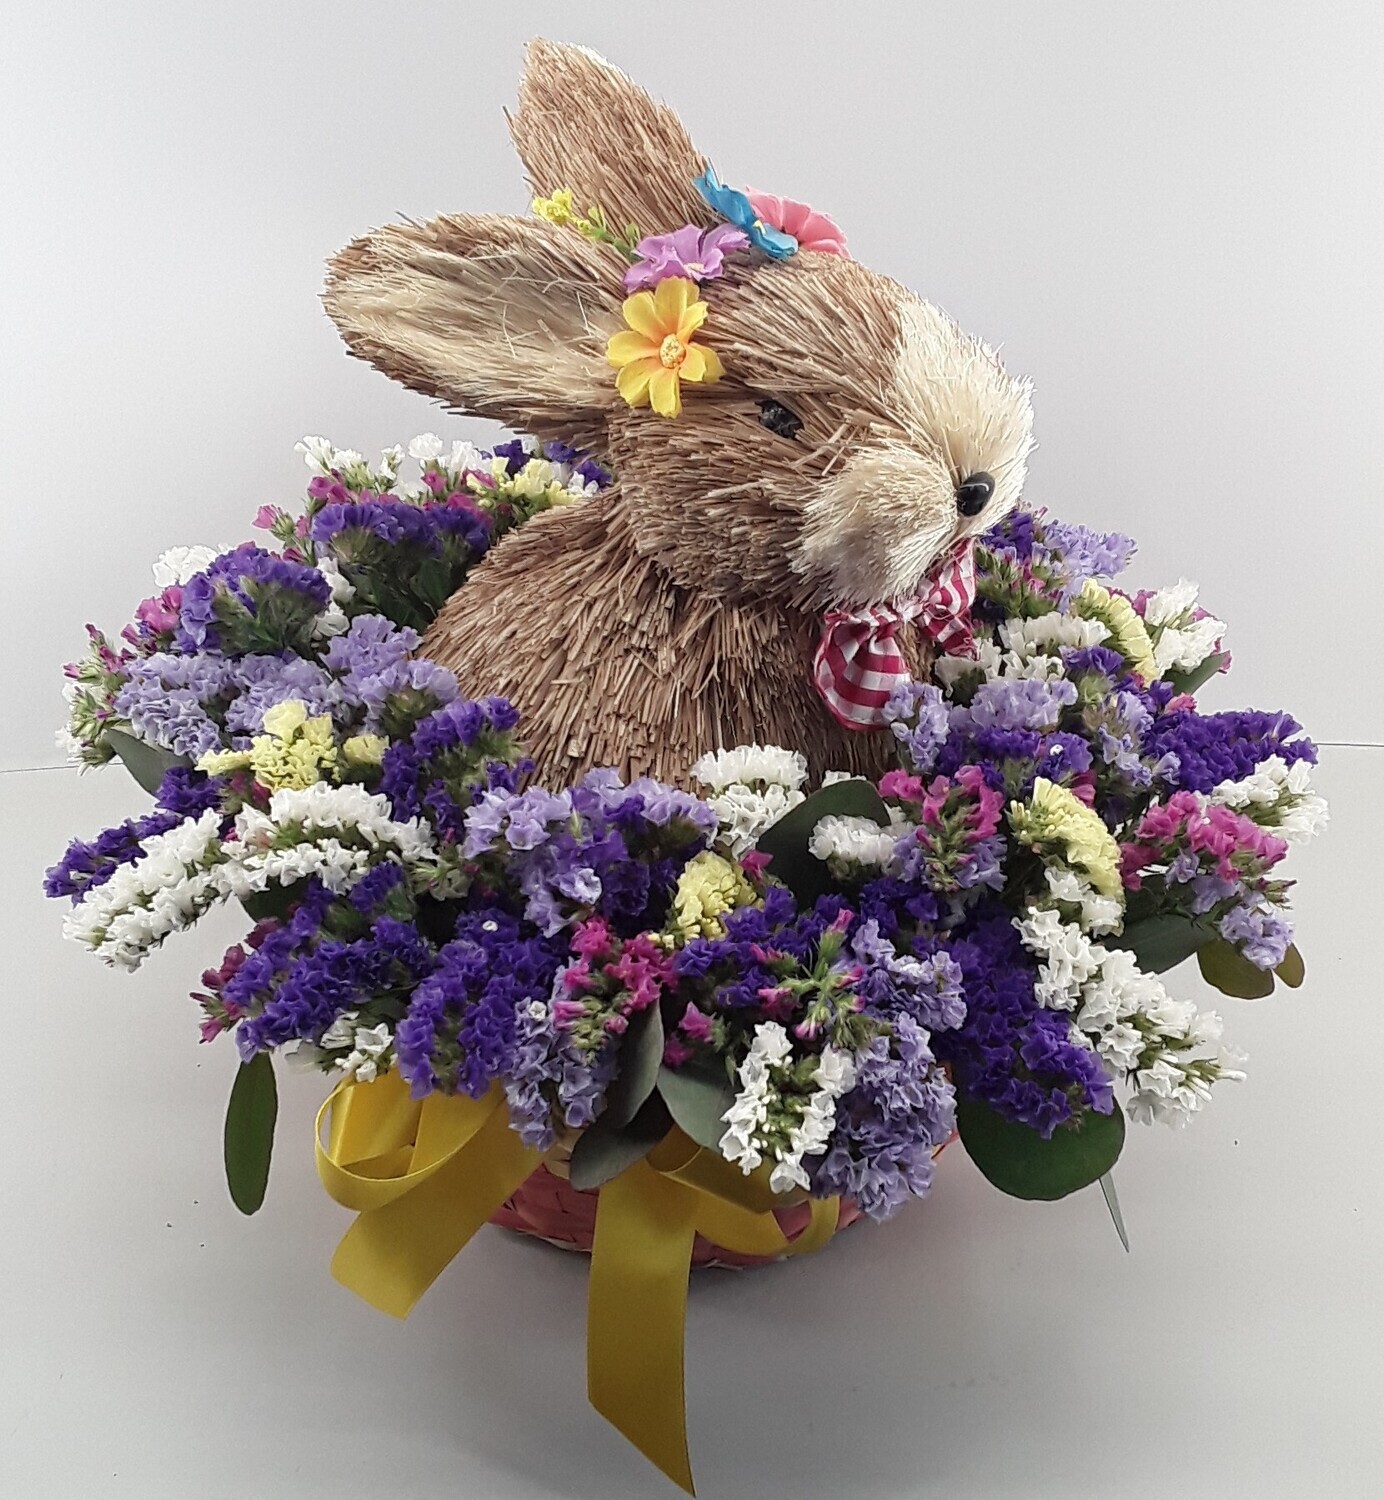 E1--Easter creation with "athanato" in a basket